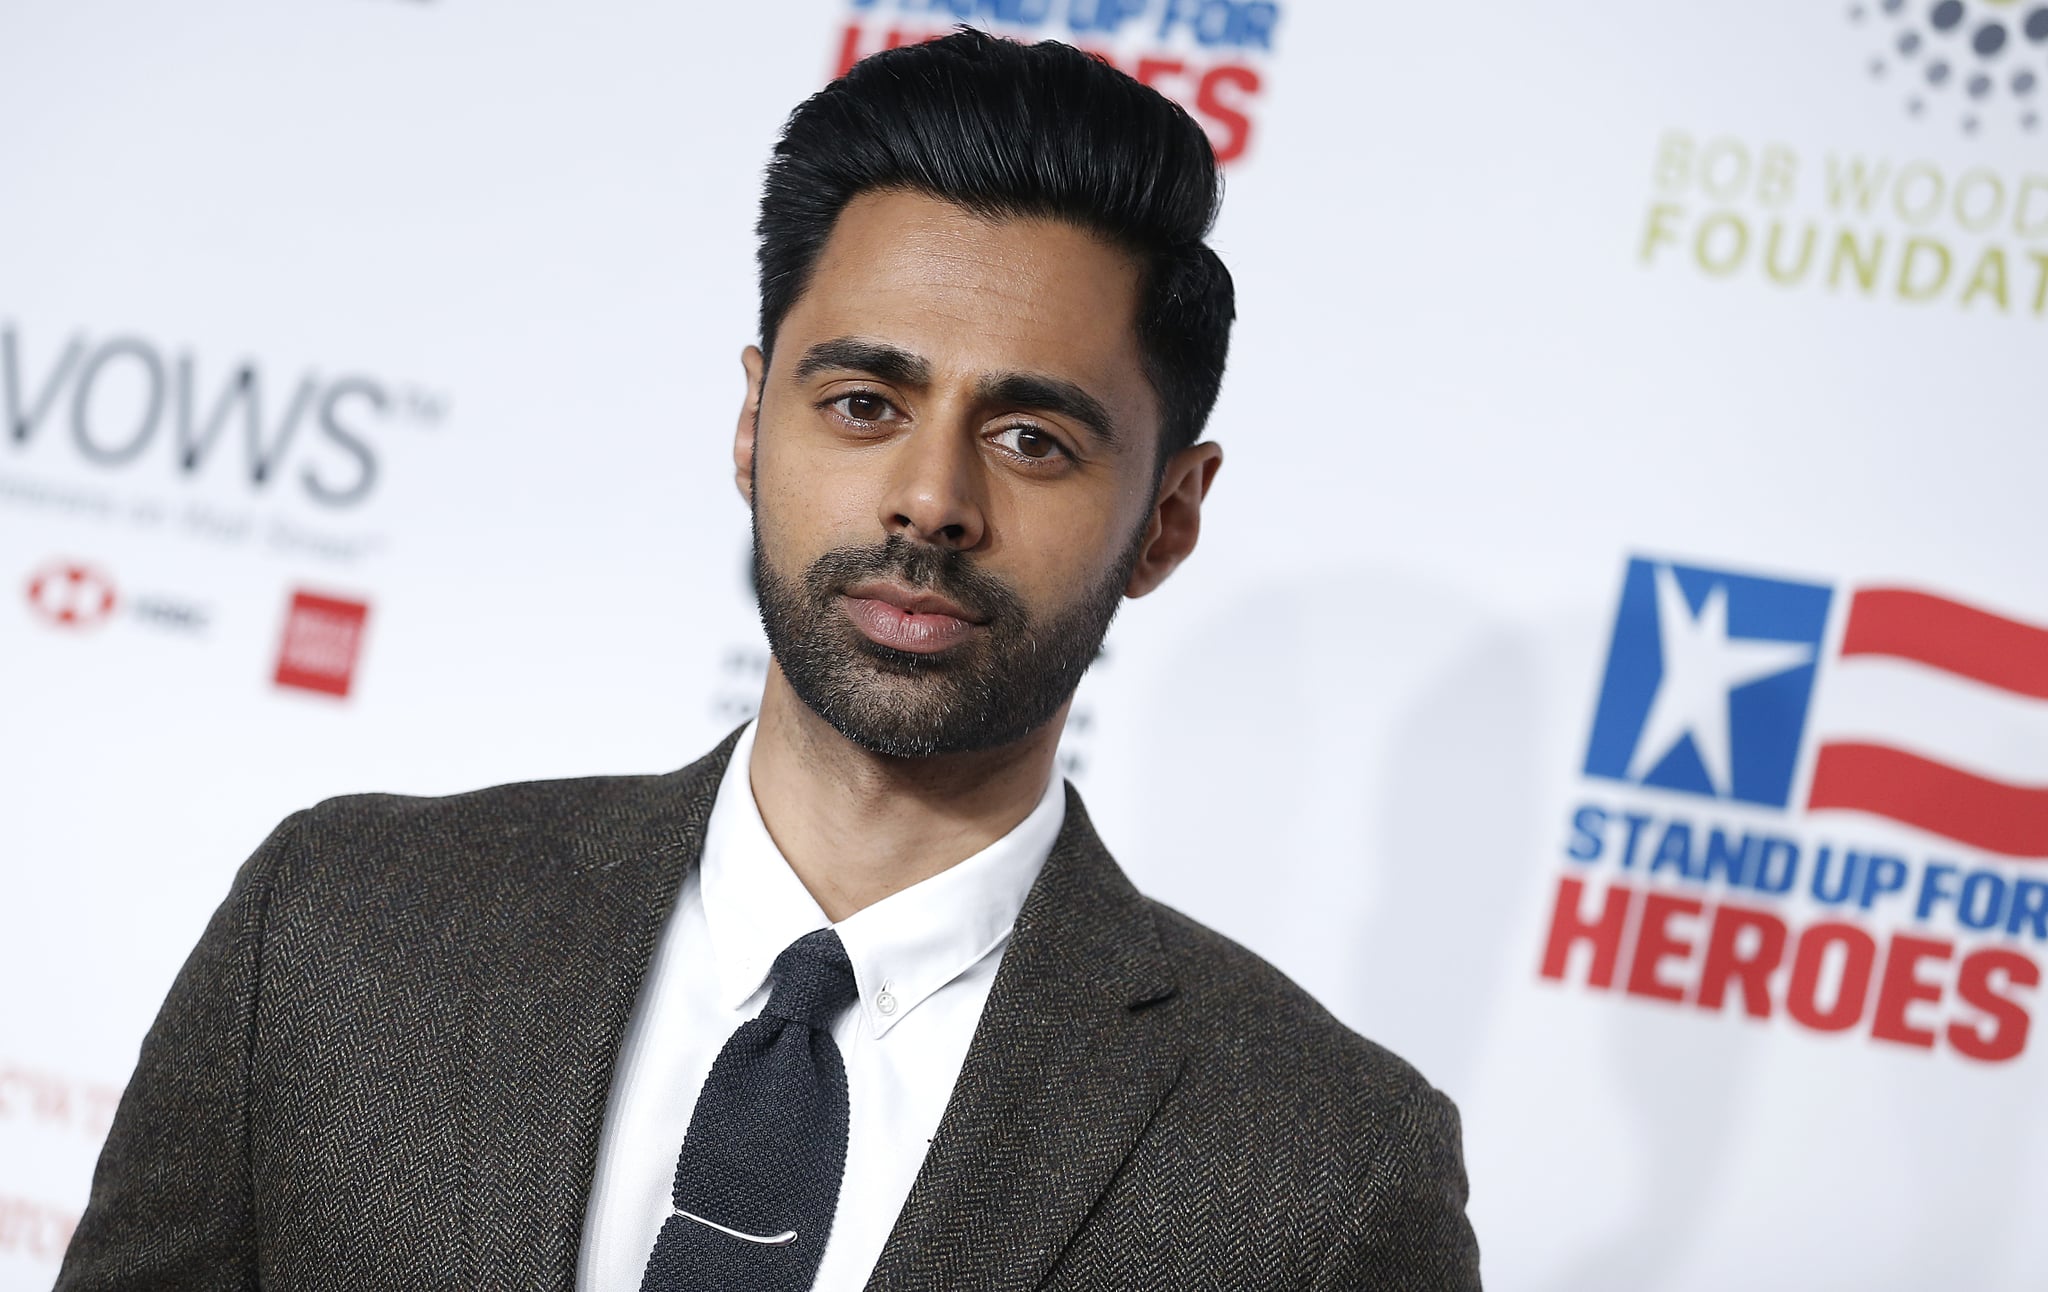 NEW YORK, NEW YORK - NOVEMBER 04 Hasan Minhaj attends 13th Annual Stand Up For Heroes at The Hulu Theater at Madison Square Garden on November 04, 2019 in New York City. (Photo by John Lamparski/Getty Images)